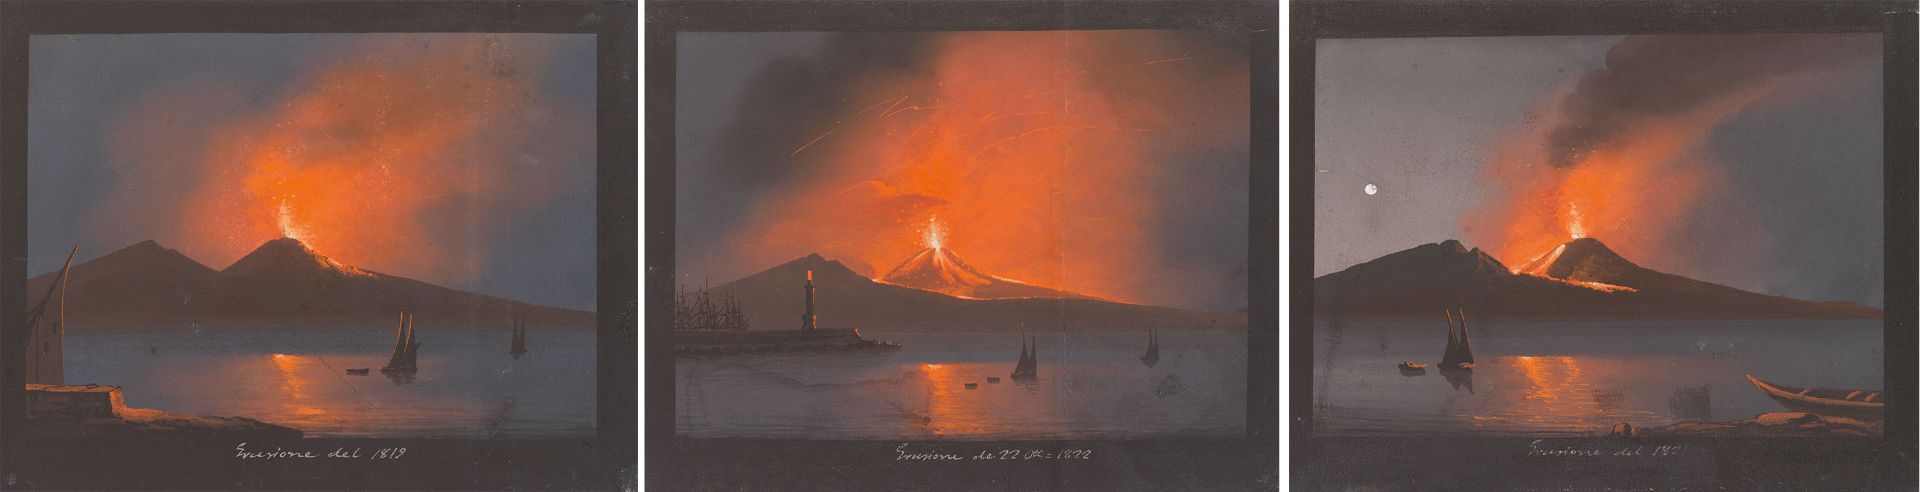 Artist of the 19th century: Mixed lot of 3 pieces.: Eruption of Vesuvius at night (1819, 1820, 1821) - Image 2 of 4